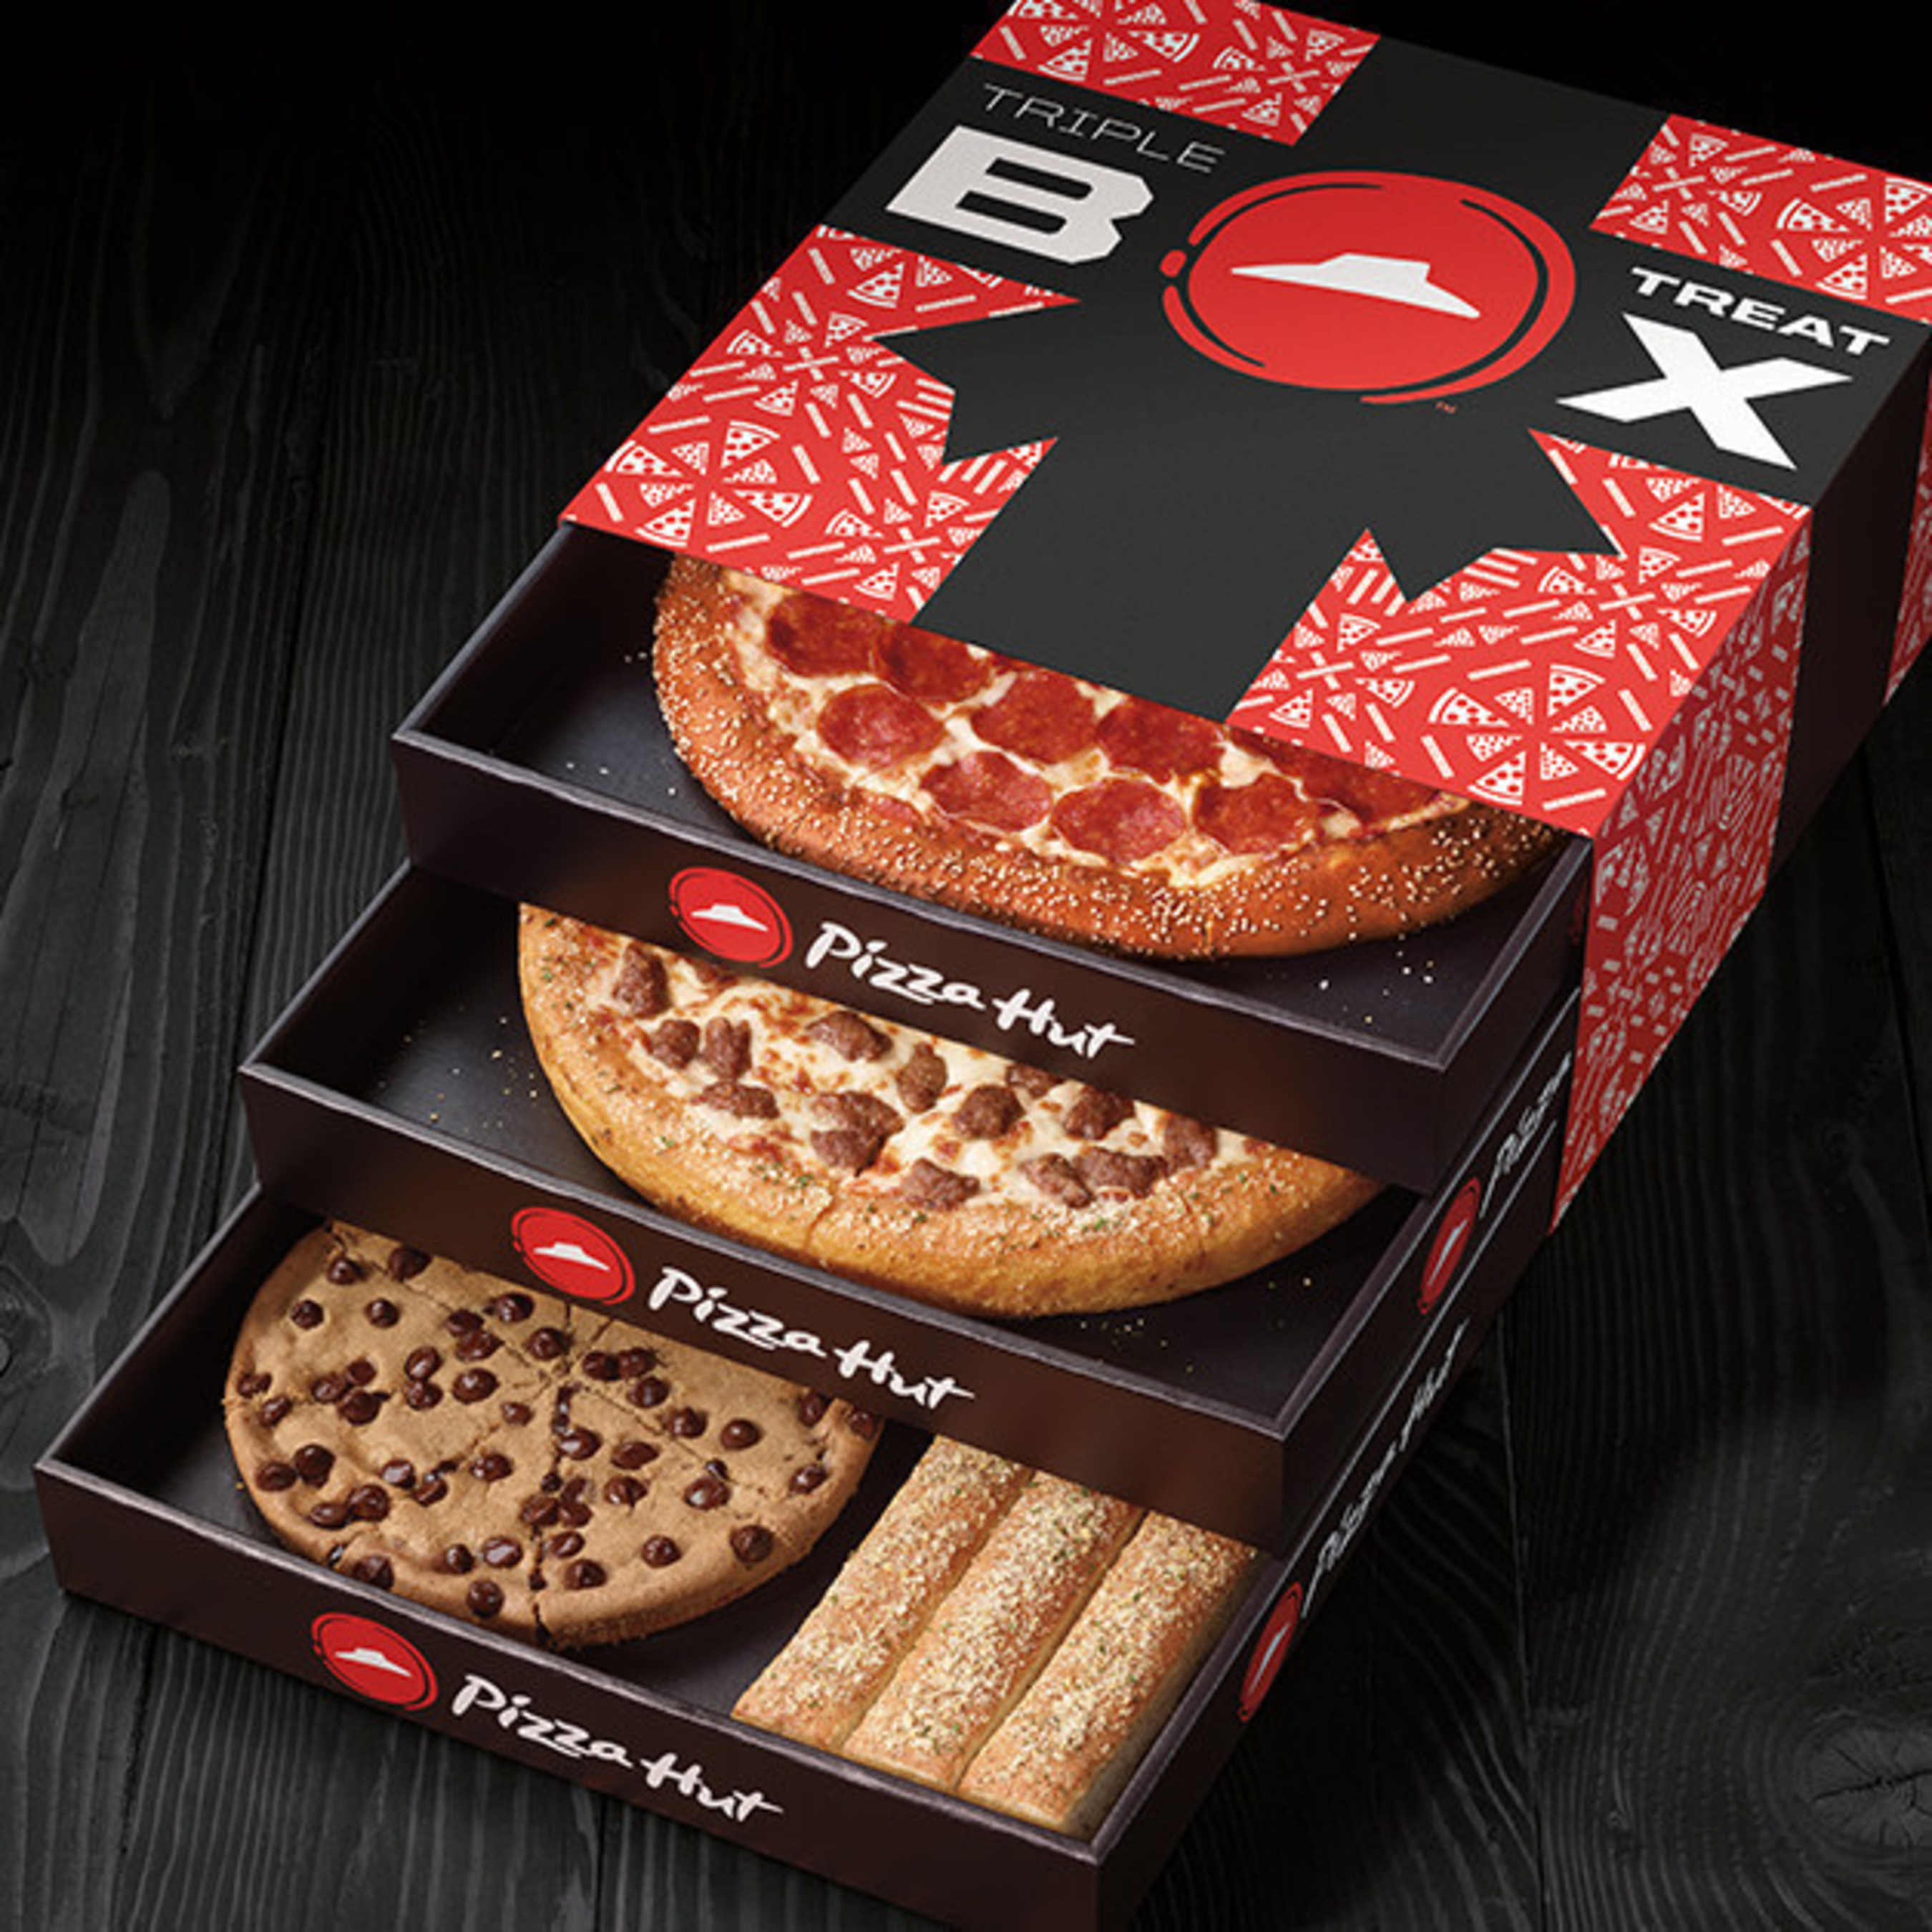 Starting today, pizza lovers everywhere will have a new item to add to their holiday wish lists: Pizza Hut's new Triple Treat Box, a uniquely-packaged pizza "box" that features pizzas, desserts, sides and more. Available while supplies last, the tri-level, holiday-themed Triple Treat Box includes two medium one-topping pizzas (available on Hand Tossed, Thin N' Crispy(R) or Pan), an order of breadsticks or flavor sticks and a Hershey's Ultimate Chocolate Chip Cookie, all for just $19.99.